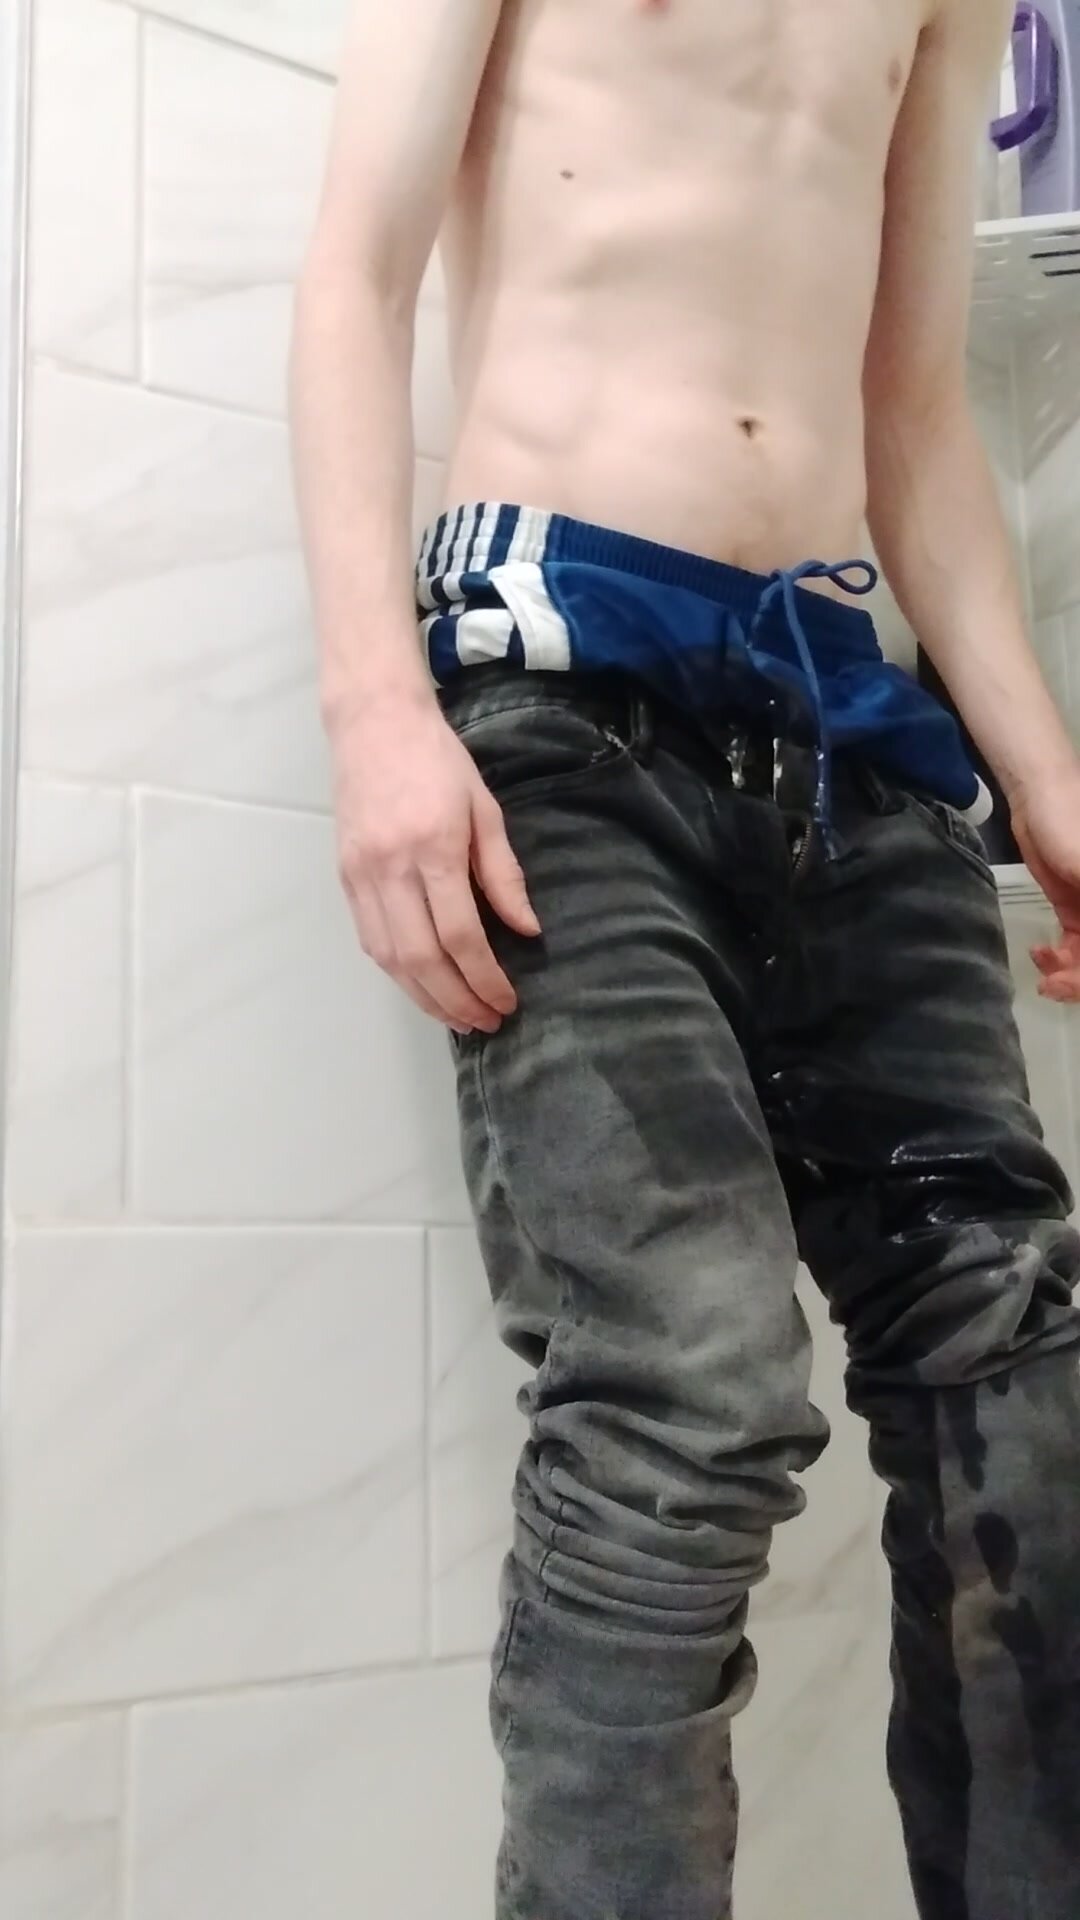 Pissing my shorts and jeans at the same time